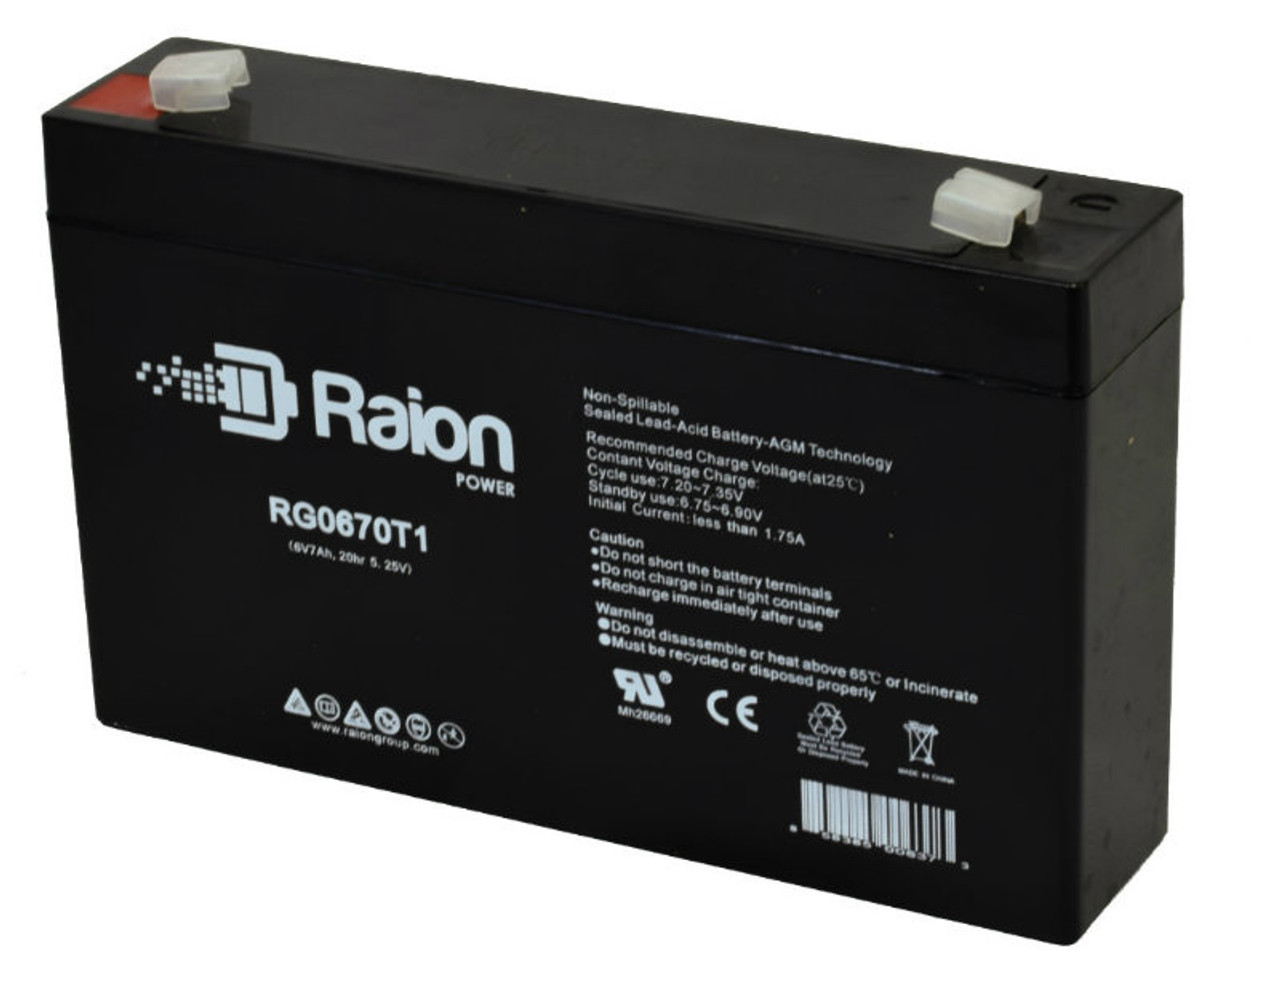 Raion Power RG0670T1 6V 7Ah Replacement Emergency Lighting Battery for Dual-Lite 12-826 / 12826 / 0120826